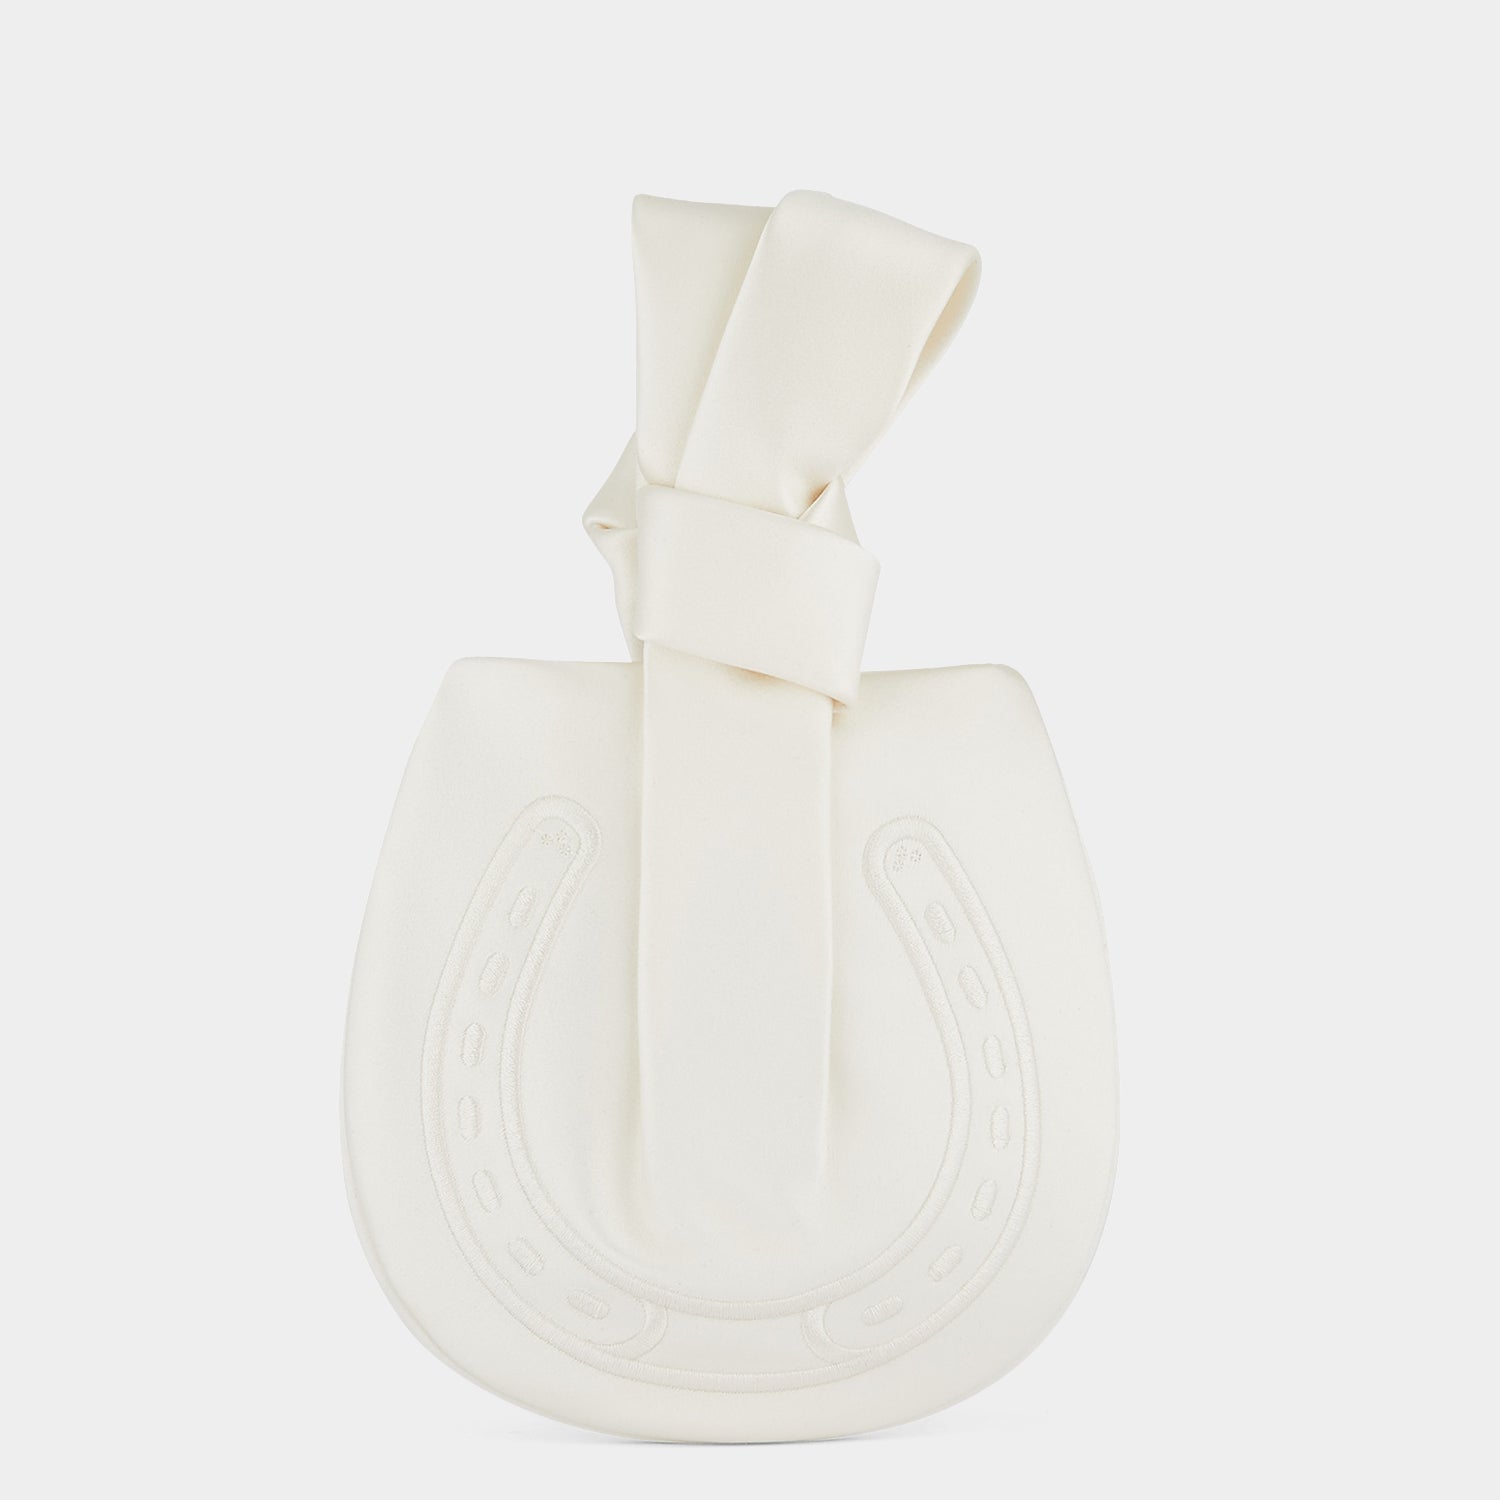 「Tie the Knot」 クラッチ -

                  
                    Double Faced Satin in Ivory -
                  

                  Anya Hindmarch JP
